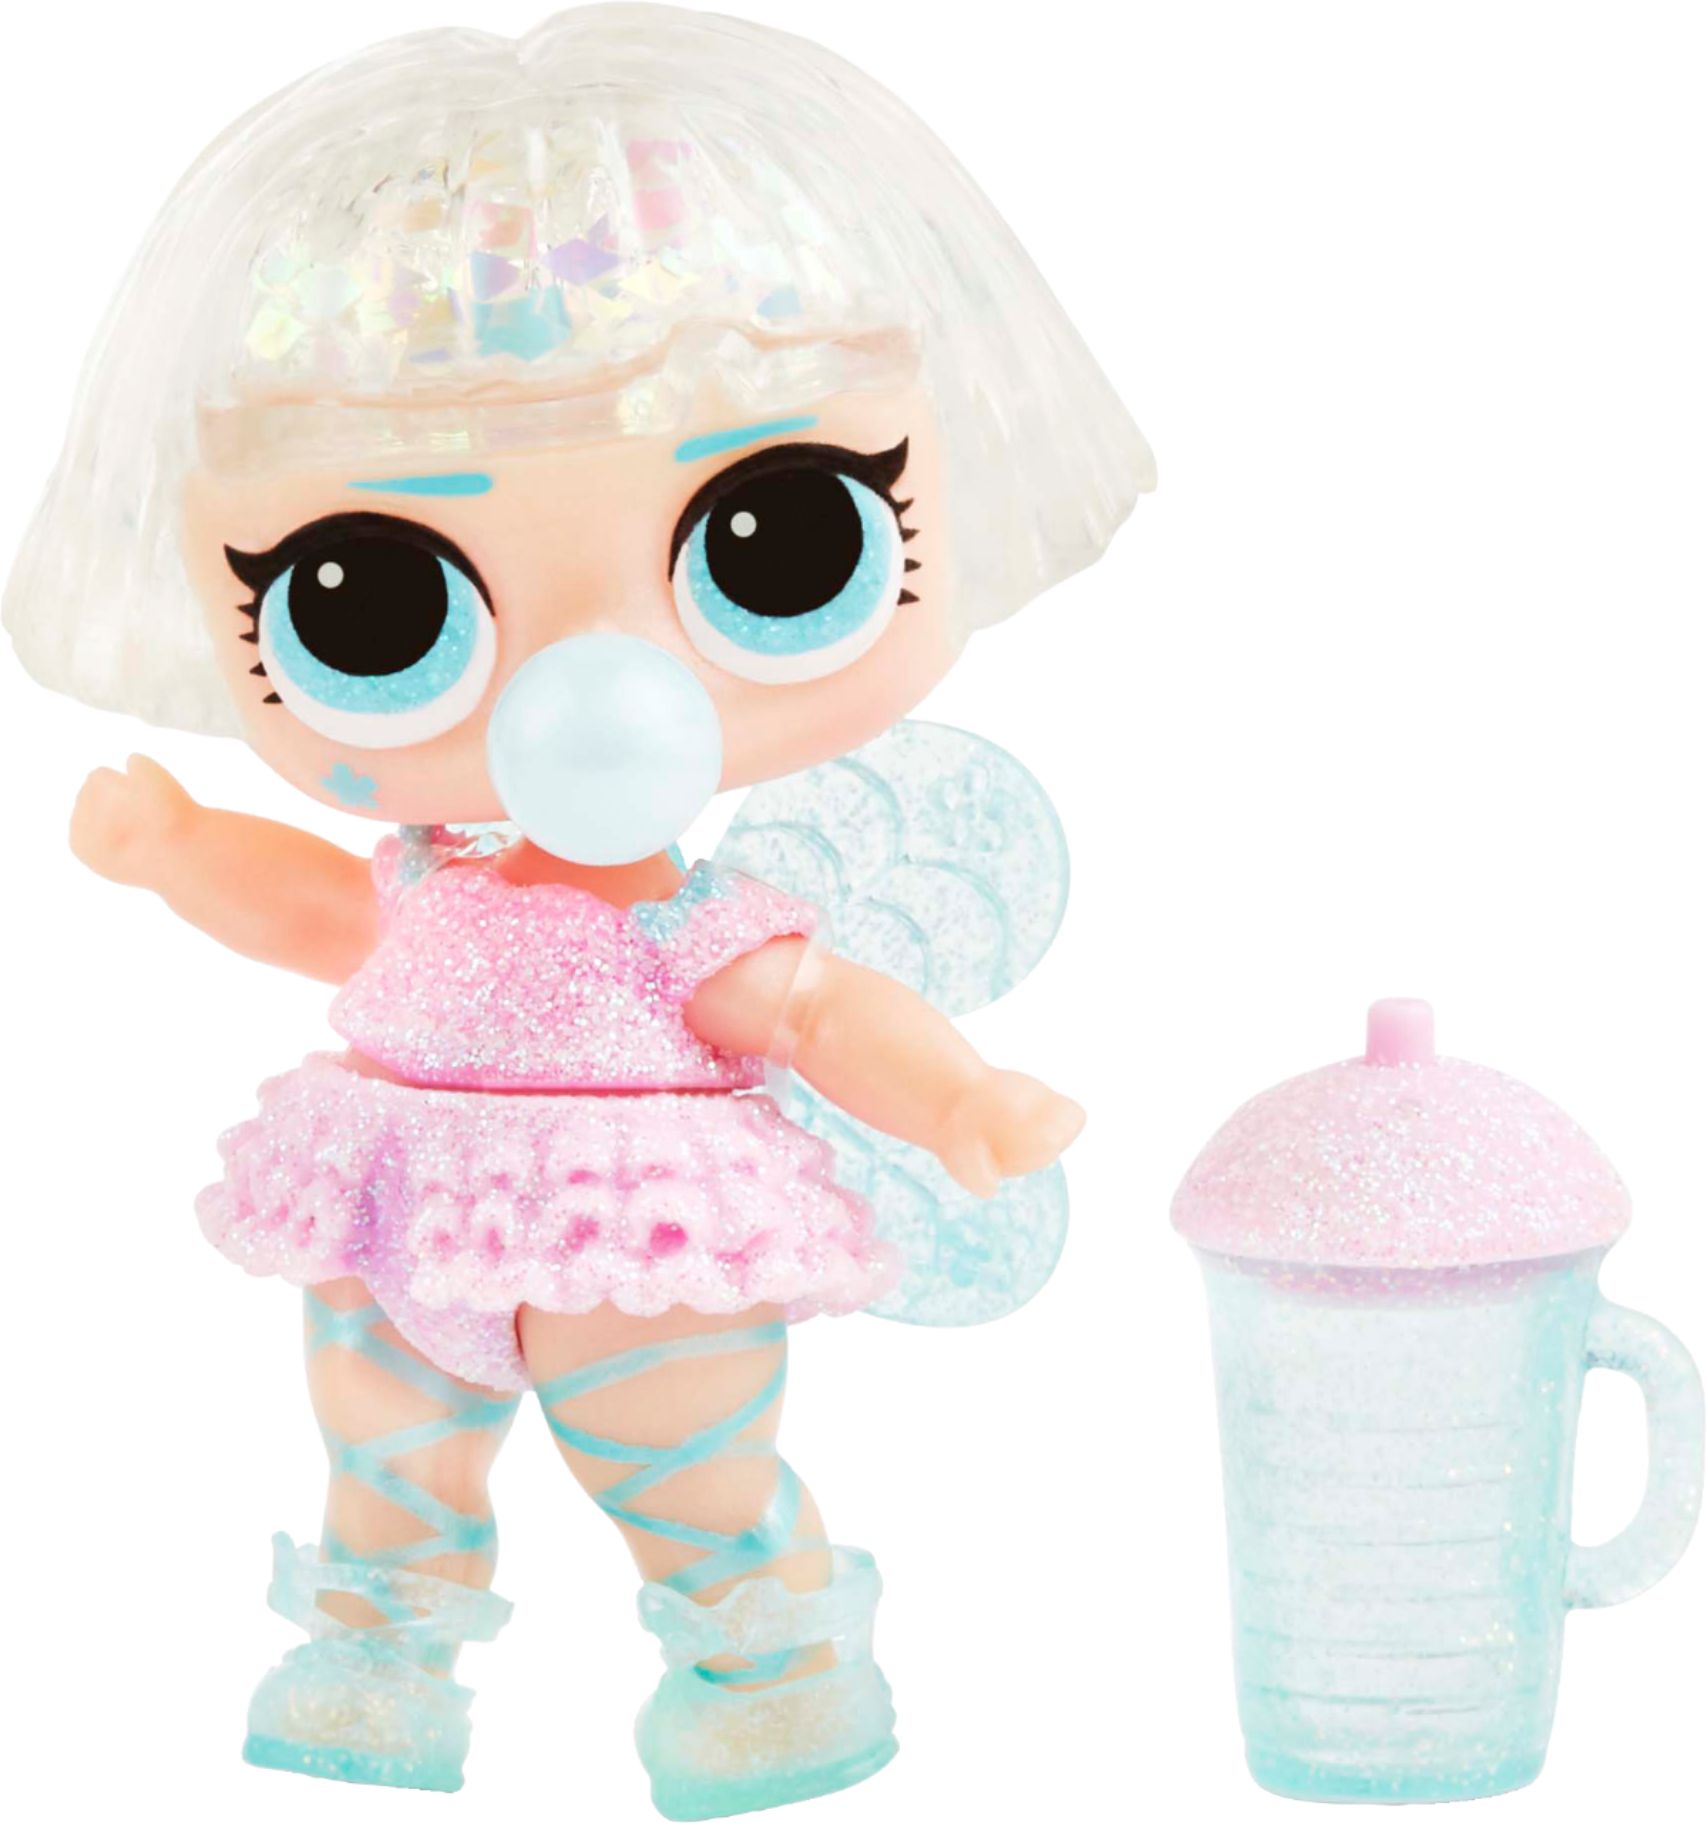 L.O.L. Surprise! Lights Series Glitter Doll Styles May Vary  - Best Buy